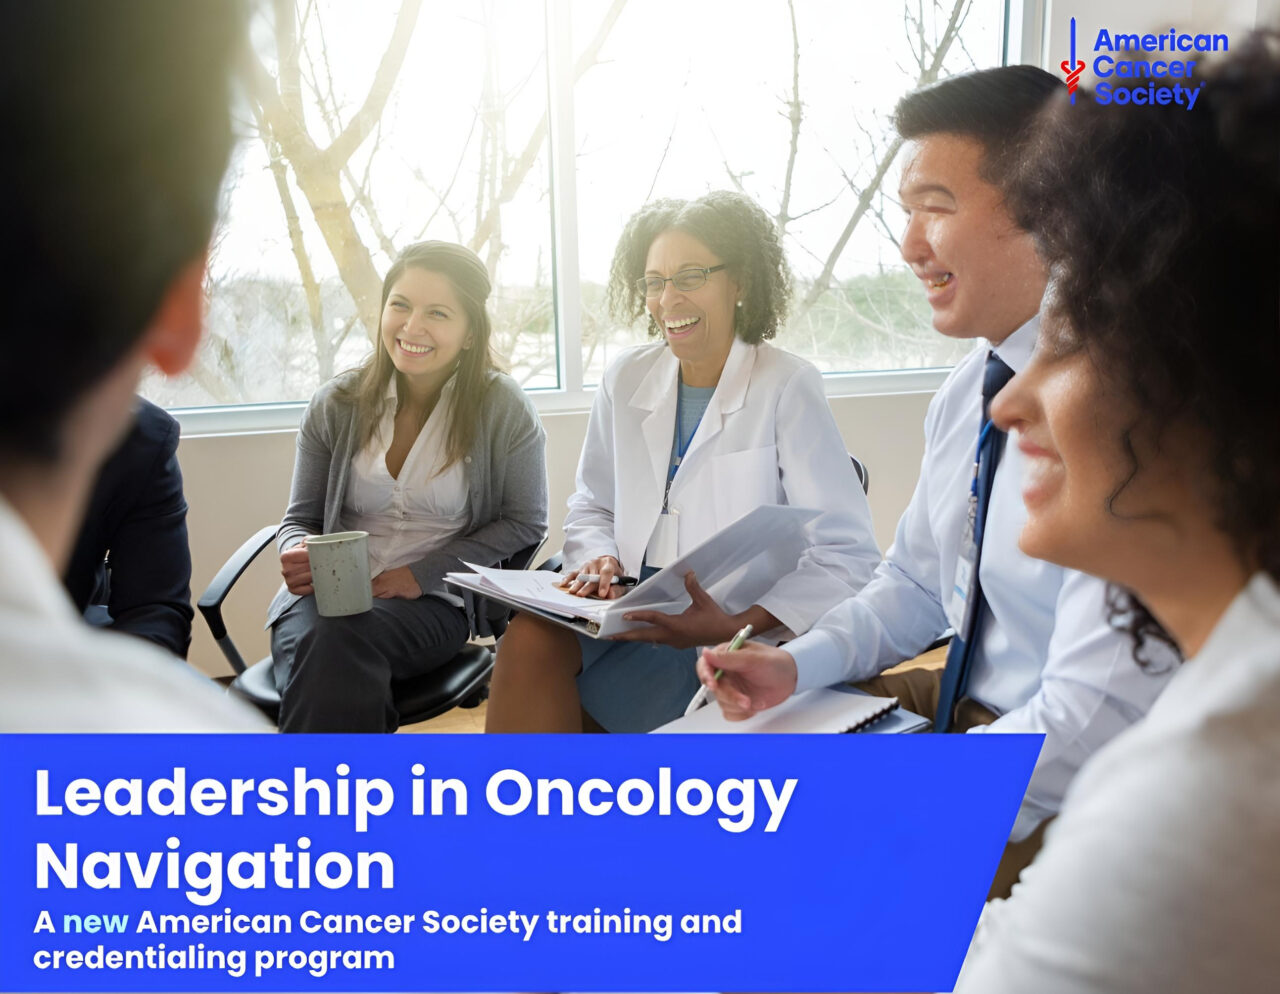 Introducing the ACS Leadership in Oncology Navigation training and credentialing program – American Cancer Society